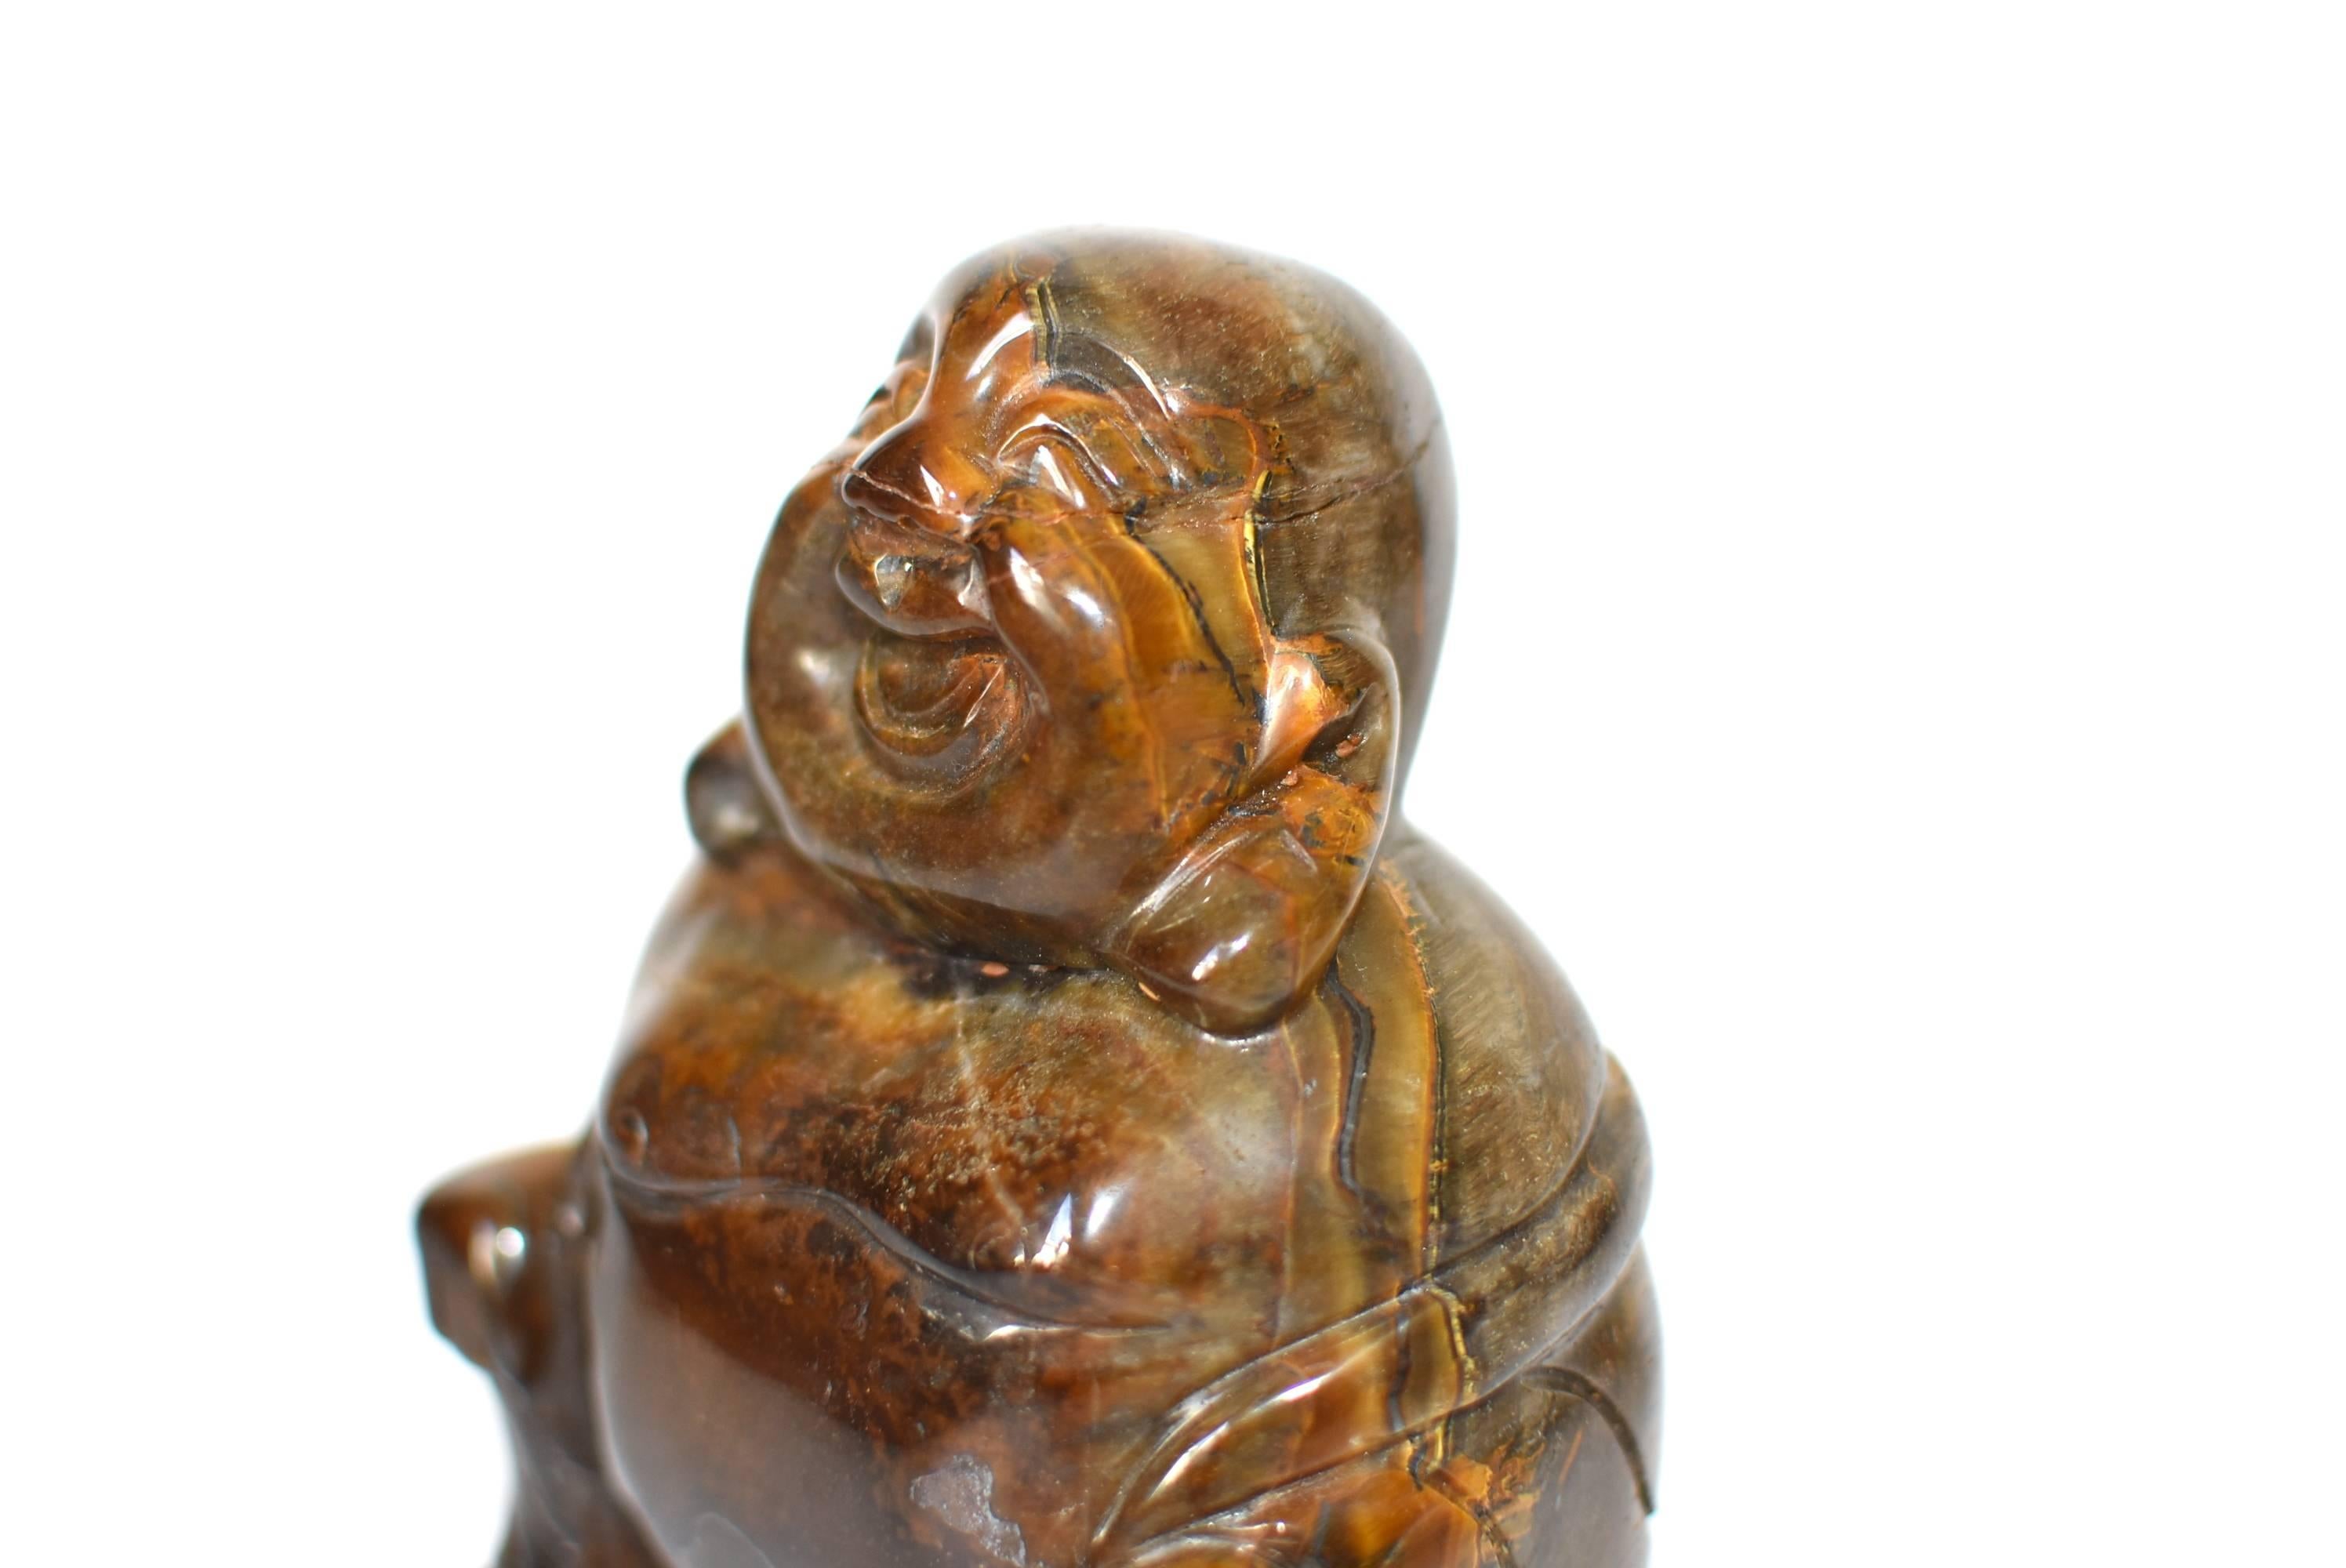 A beautiful natural tiger's eye sculpture depicting the Happy Buddha. This entire sculpture is made of one piece of the finest quality tiger's eye that weights 1.4 lb with fantastic iridescence. One of a kind. Tiger's eye is believed to enable clear